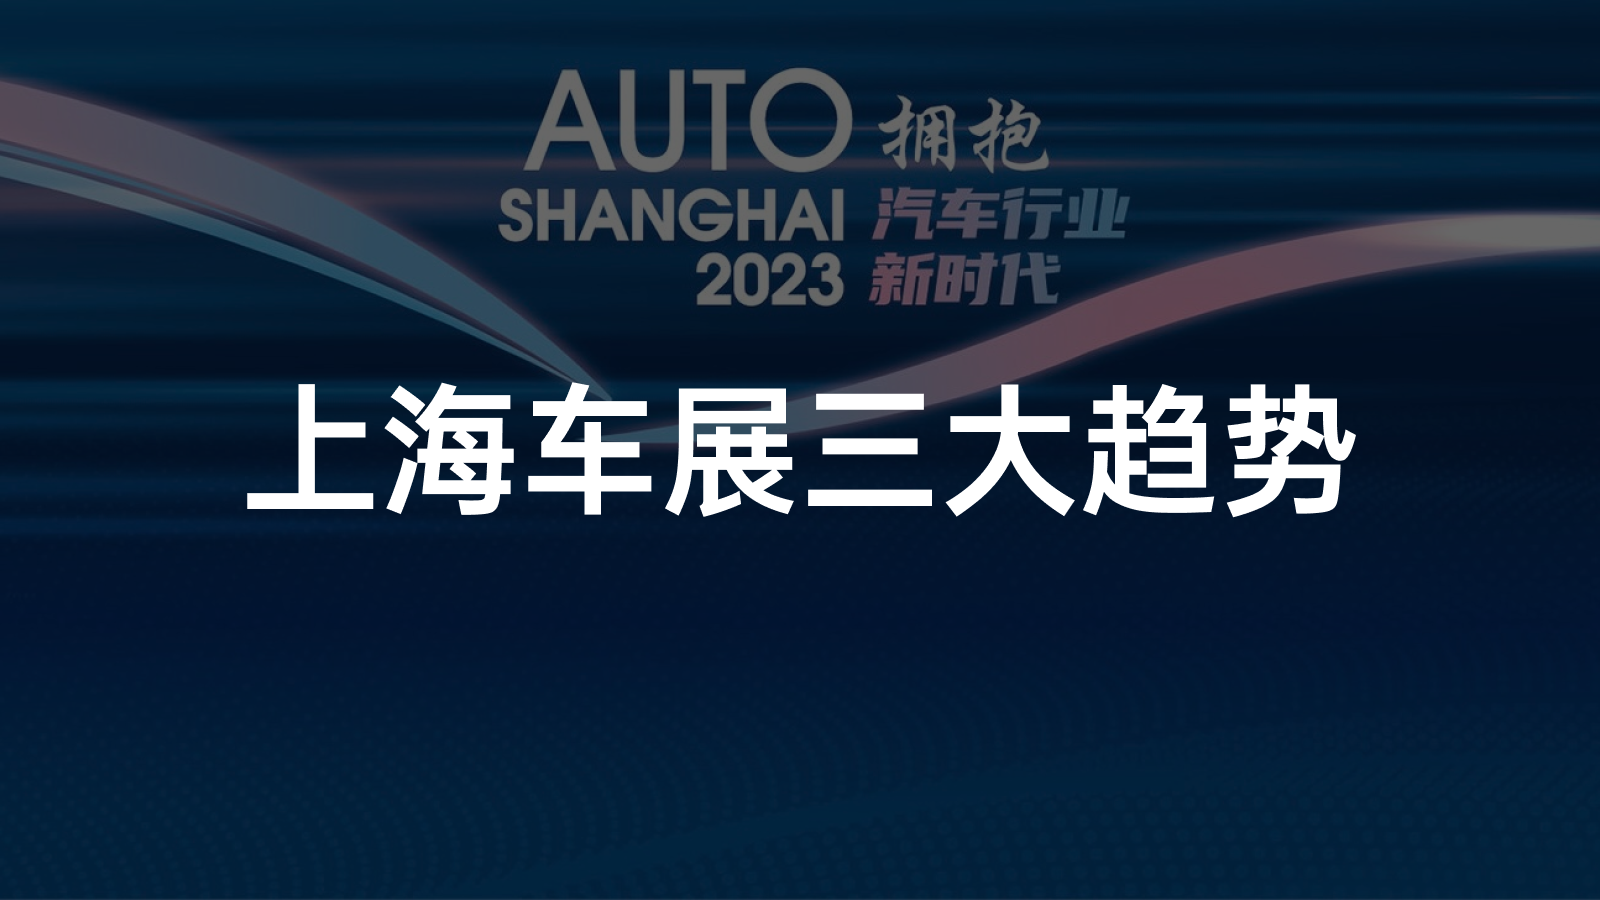 Embracing the New Era of Automobile Industry: Highlights from the 2023 Shanghai International Automobile Industry Exhibition